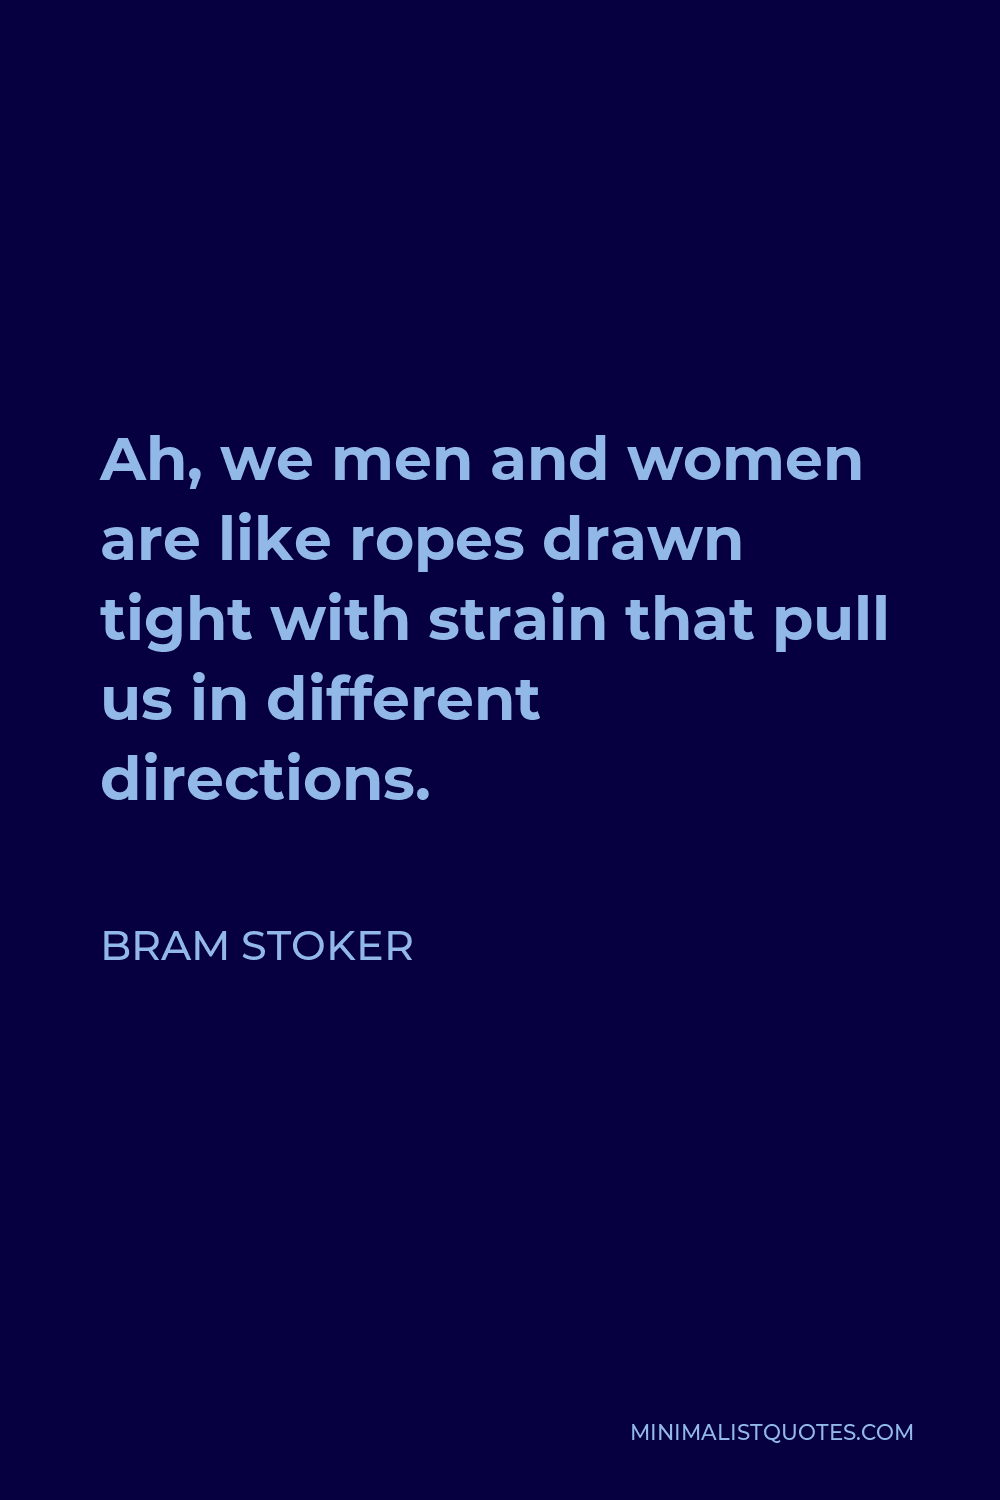 Bram Stoker Quote - Ah, we men and women are like ropes drawn tight with strain that pull us in different directions.